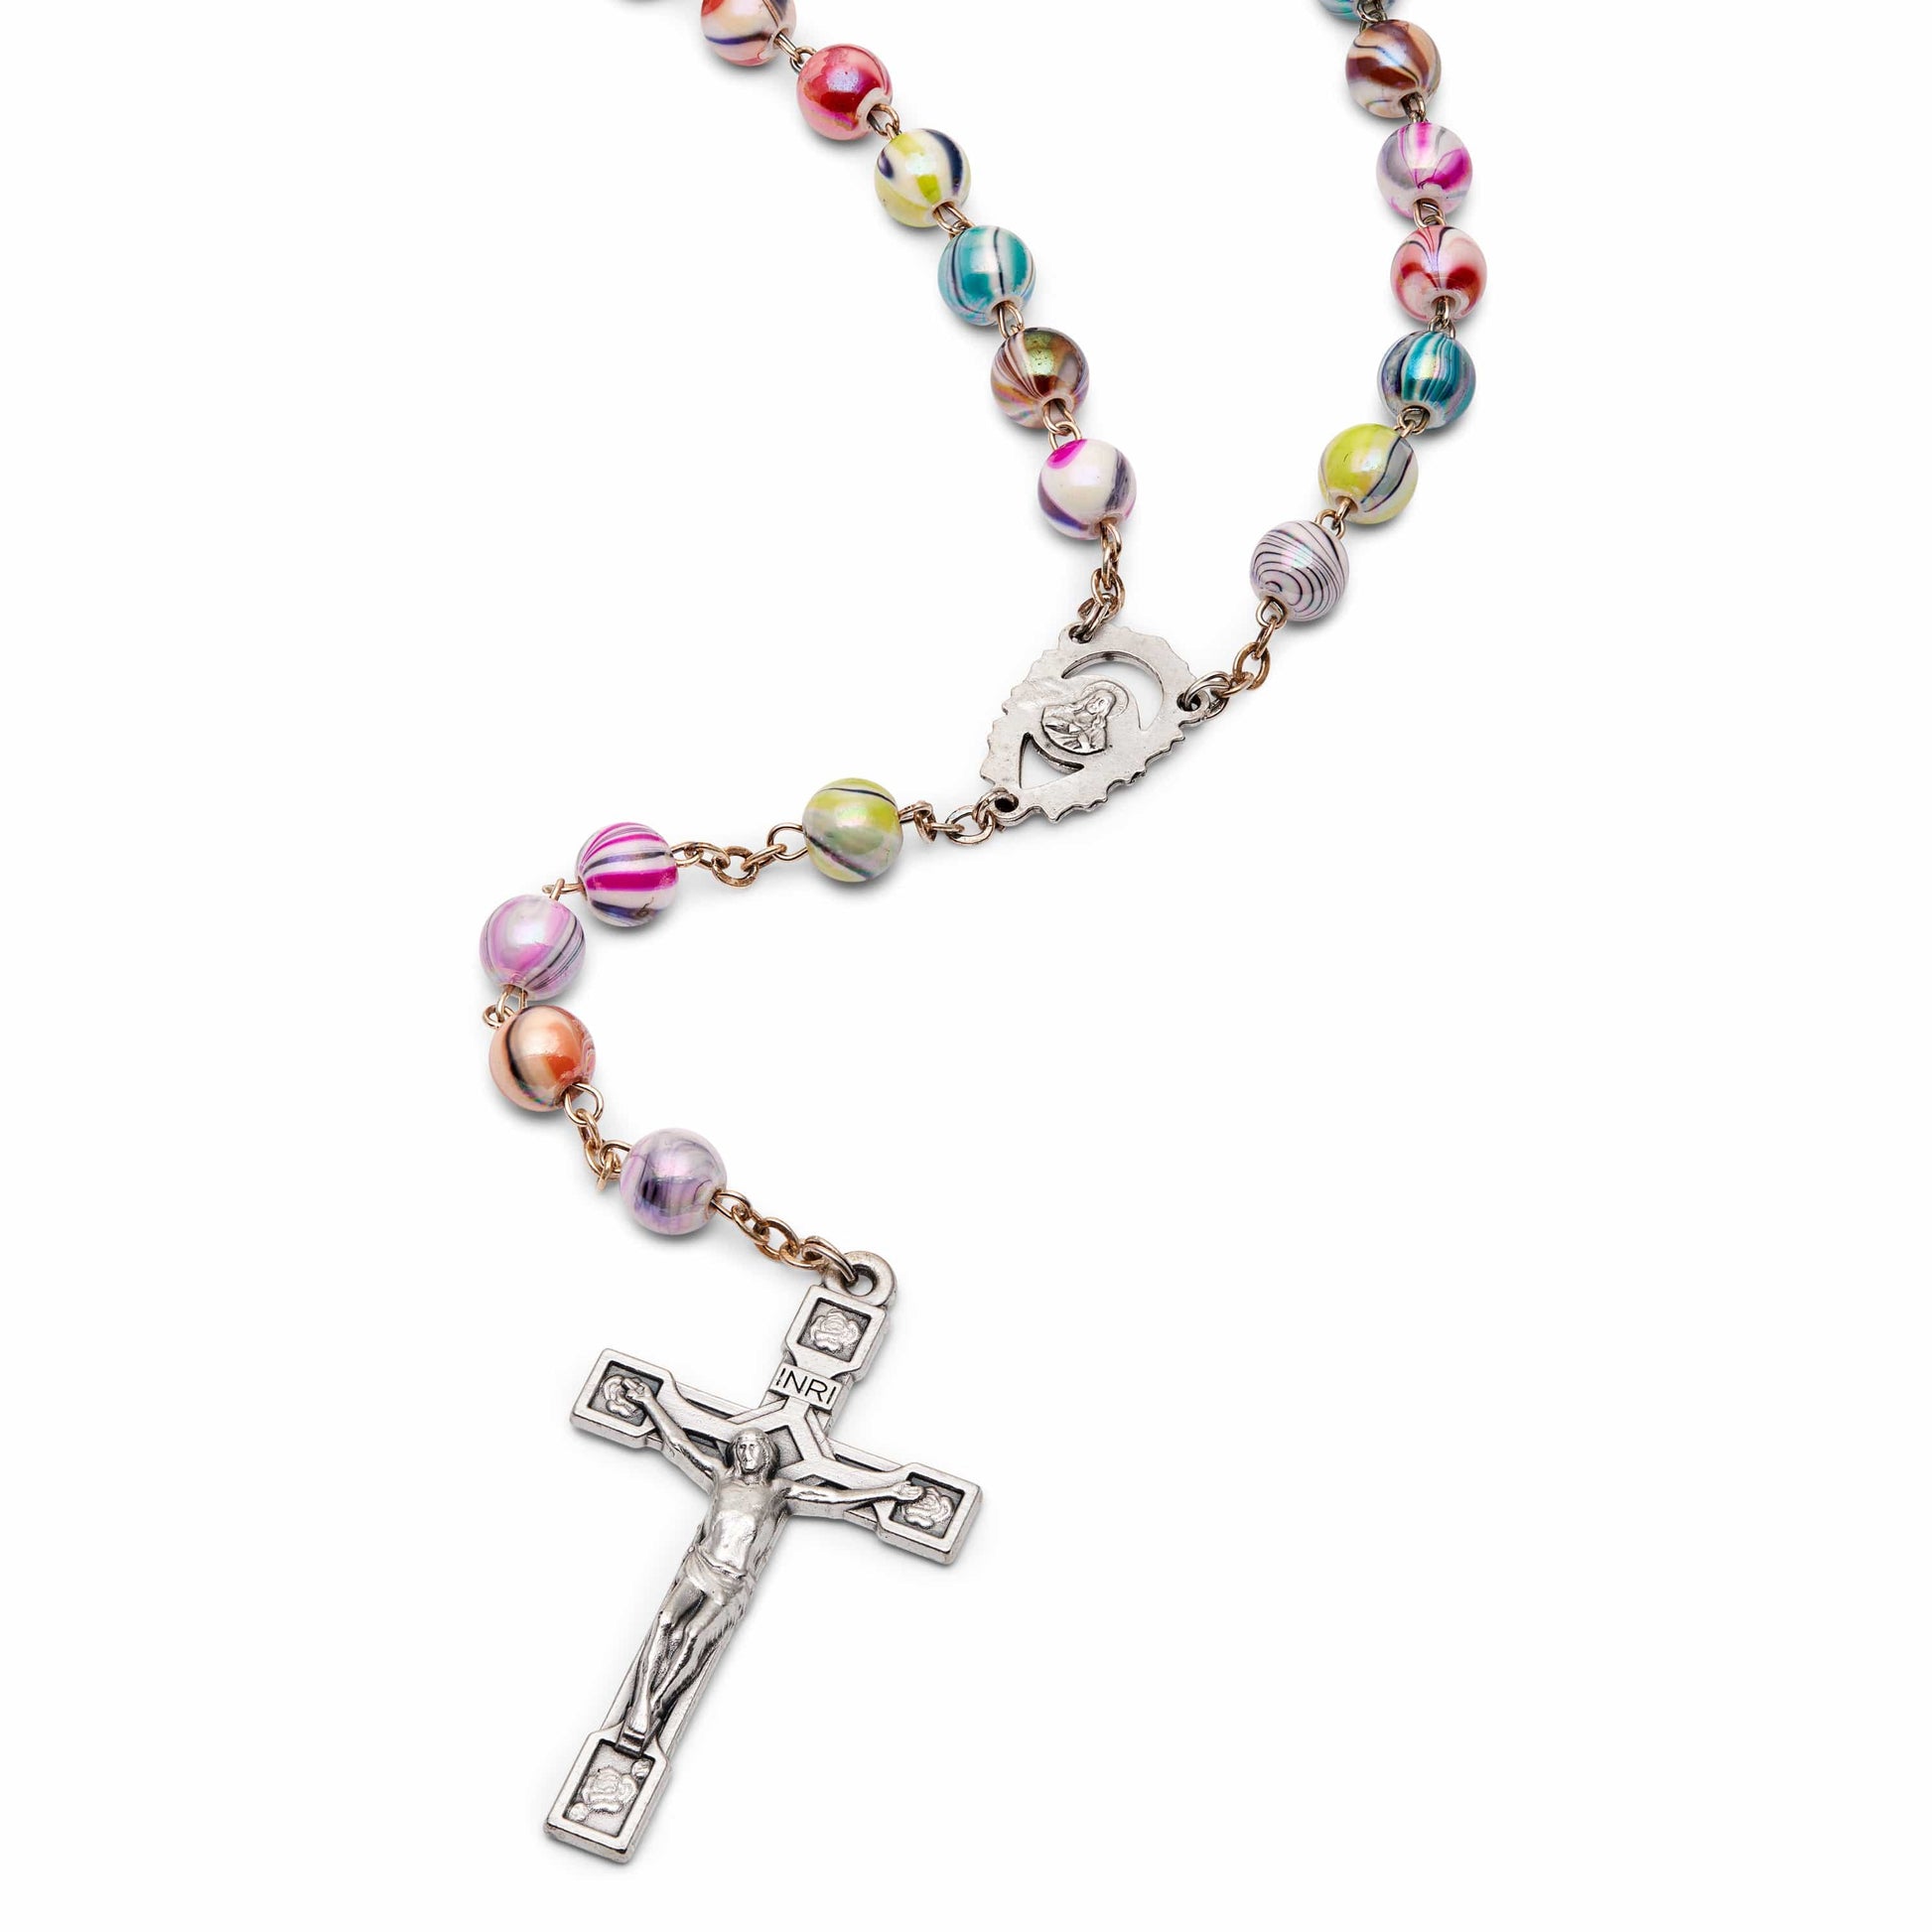 MONDO CATTOLICO Prayer Beads 54 cm (21.25 in) / 8 mm (0.31 in) Our Lady of Sorrow Multicolor Rosary beads